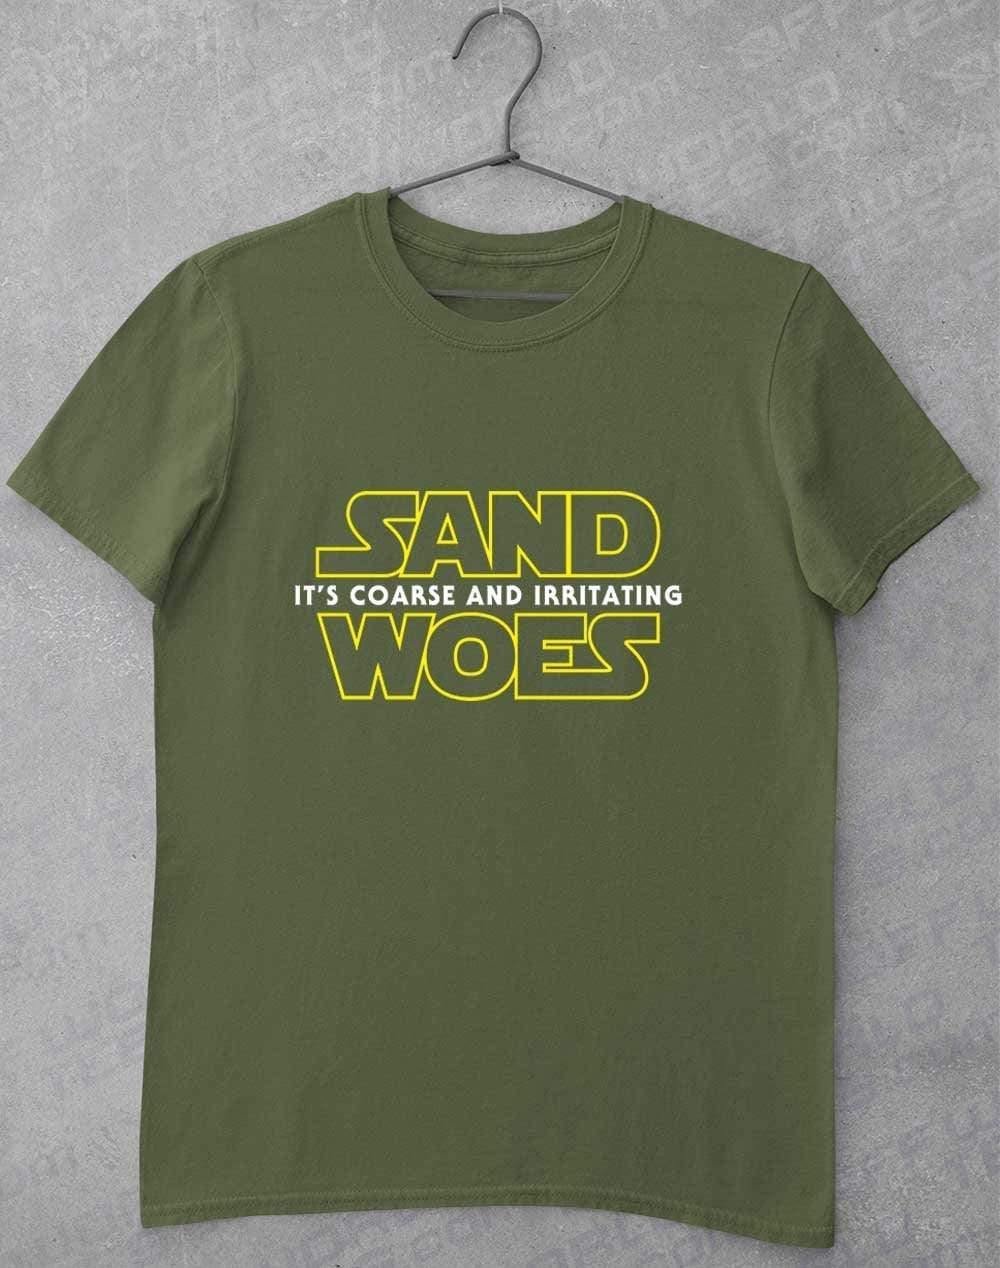 Sand Woes - T-Shirt S / Military Green  - Off World Tees